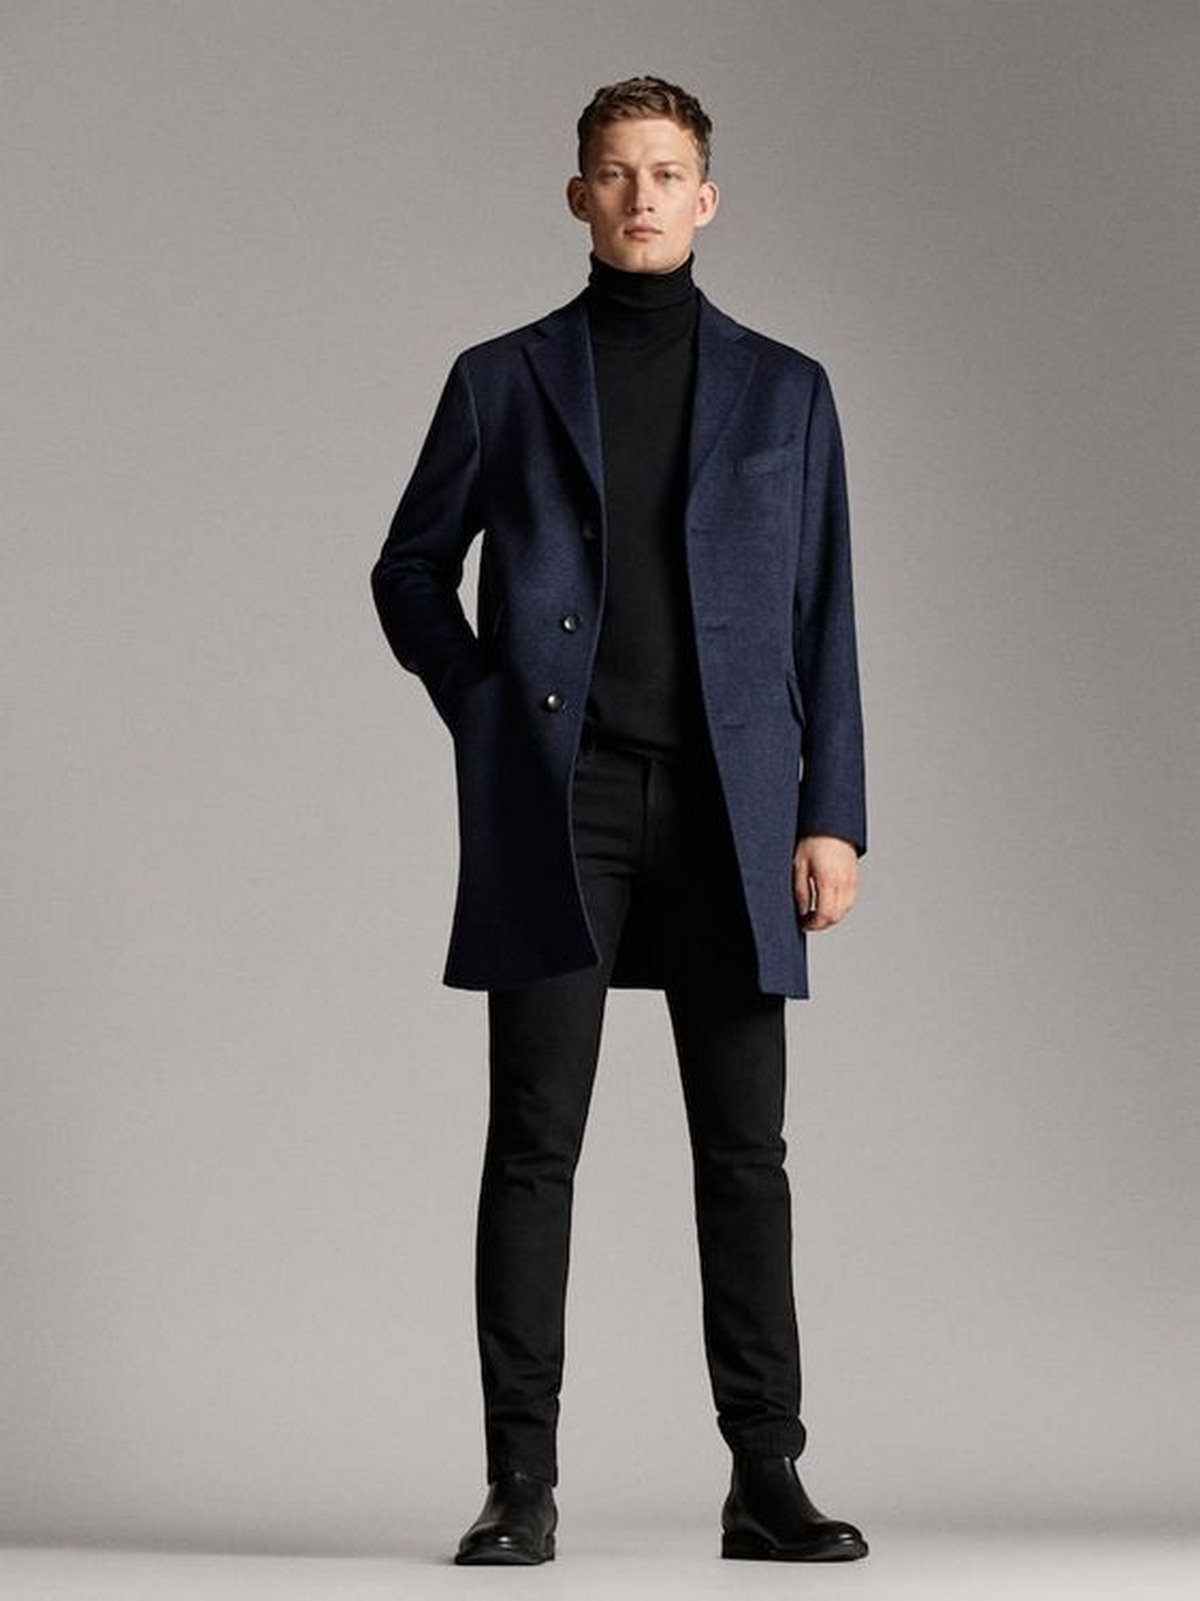 Turtleneck, Long Coat, And Trousers